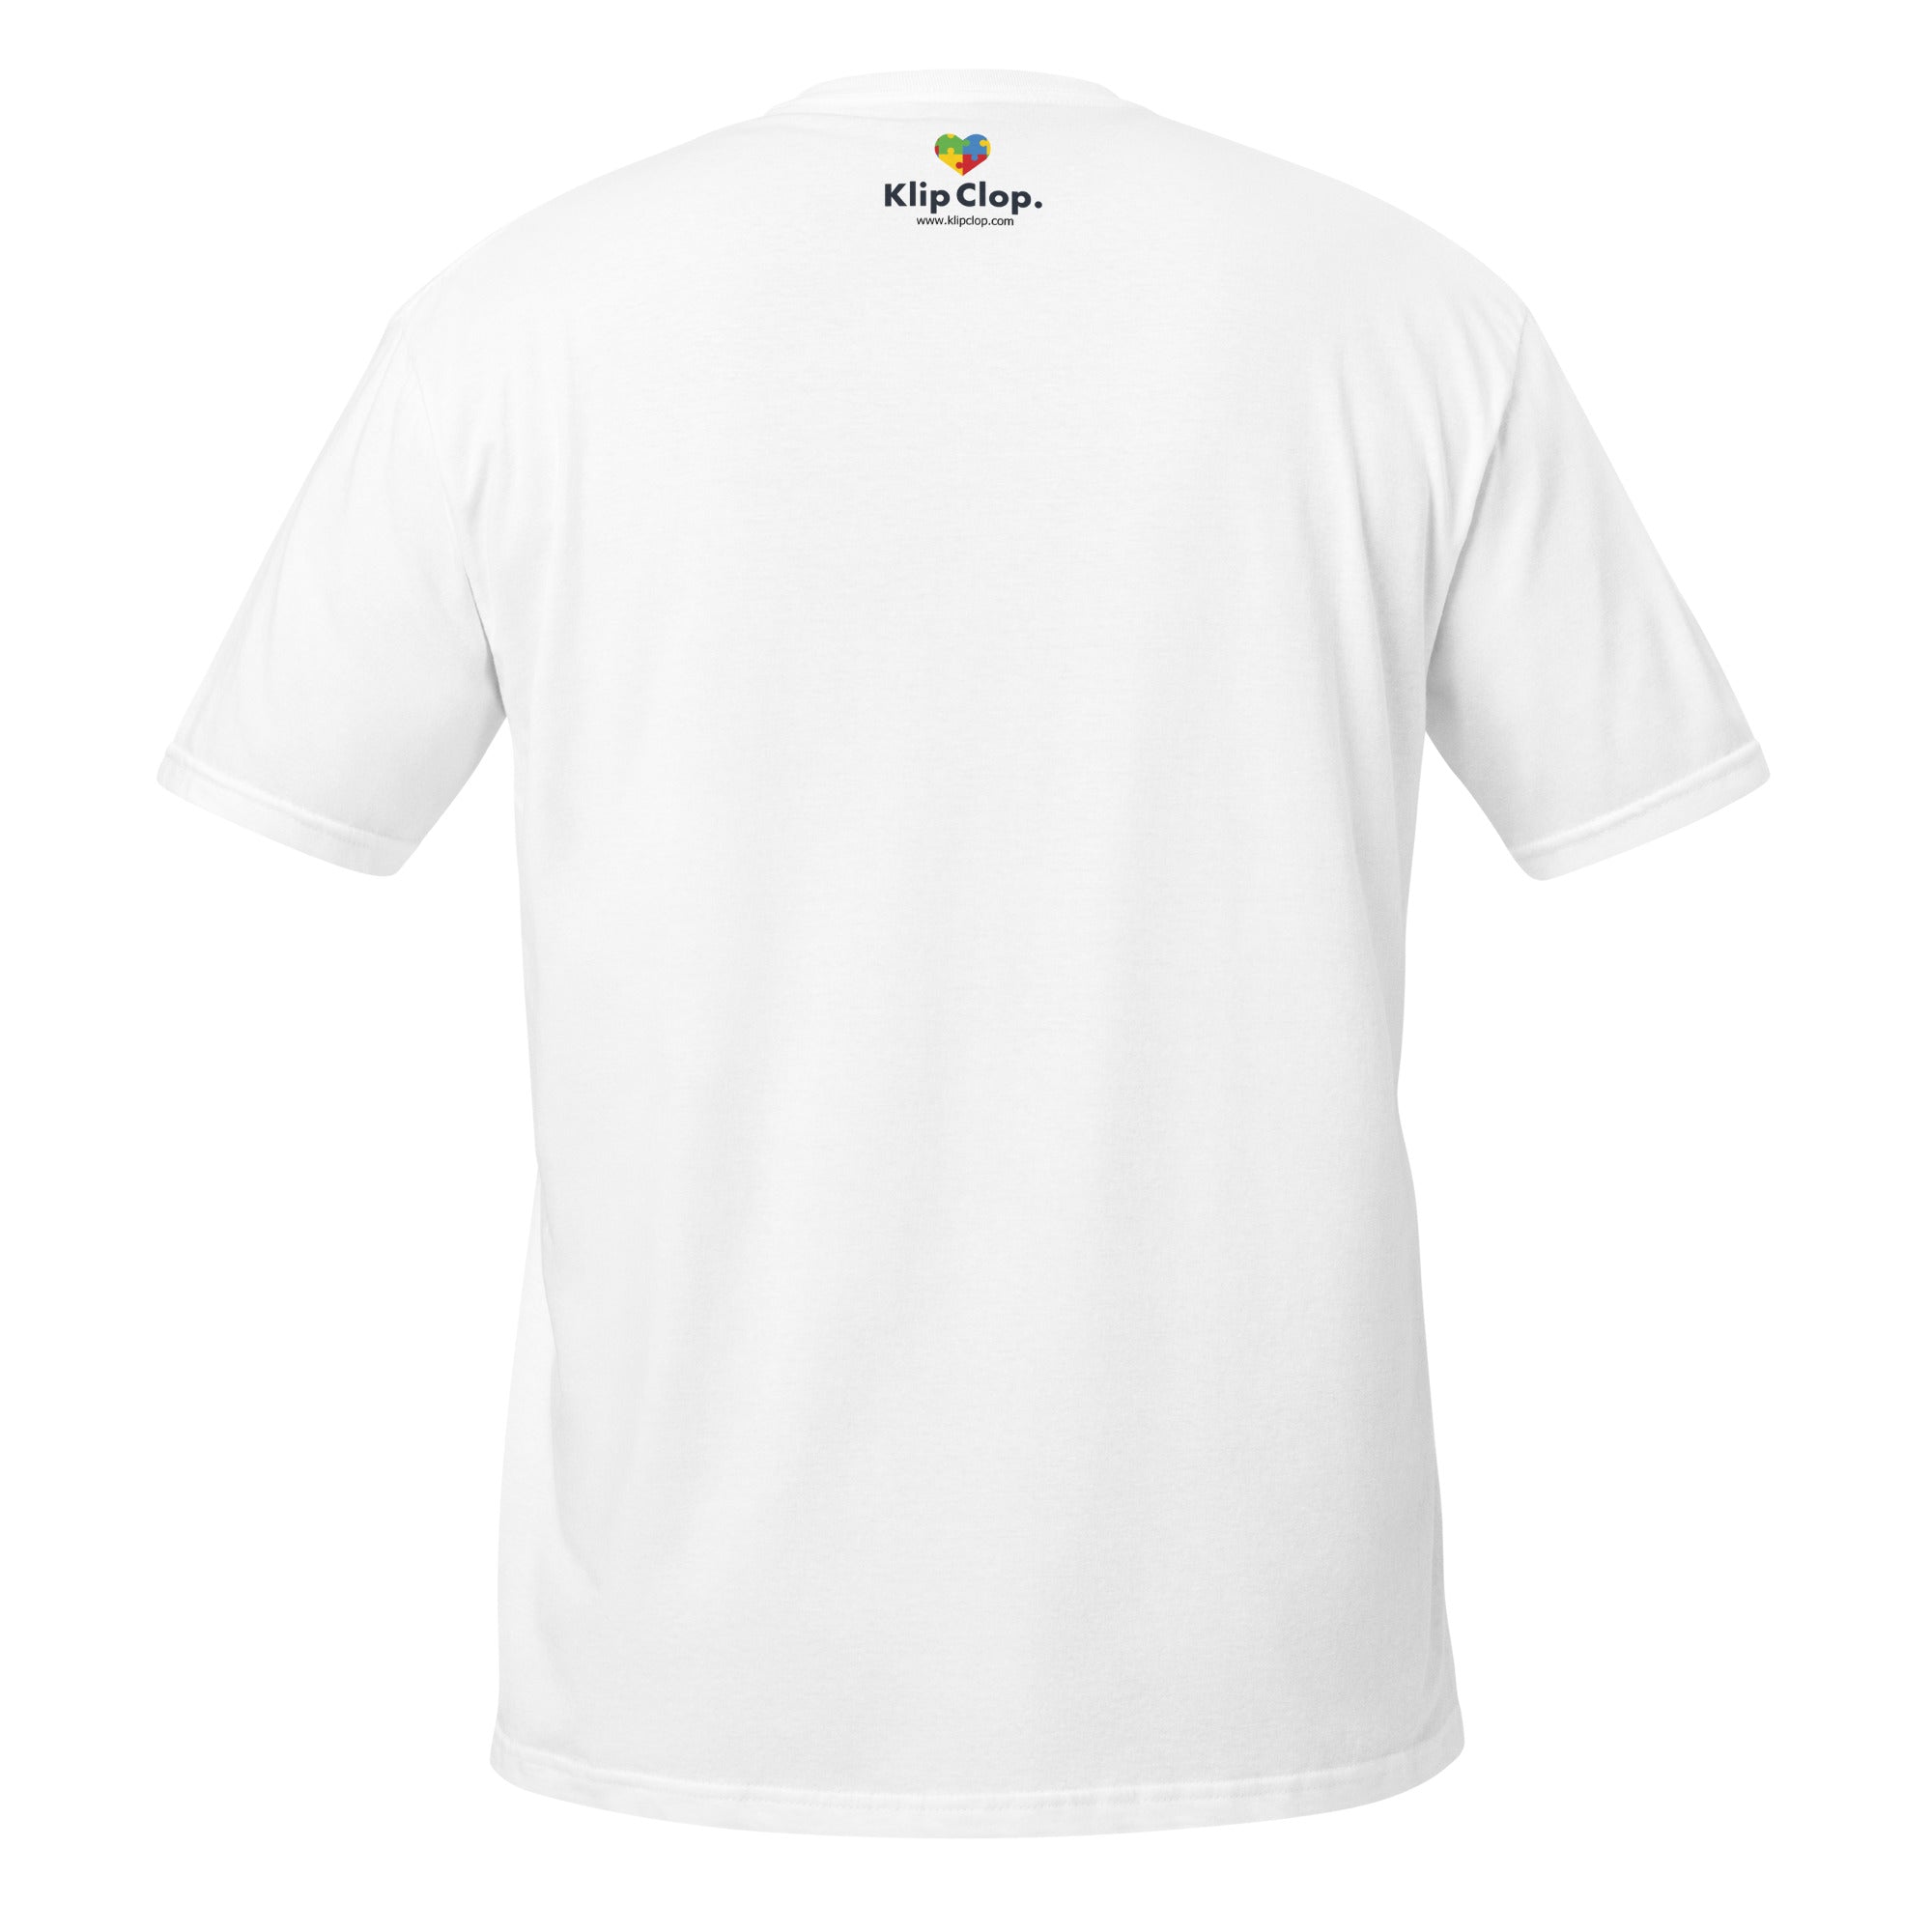 Short-Sleeve Unisex T-Shirt- Child with Autism on Board